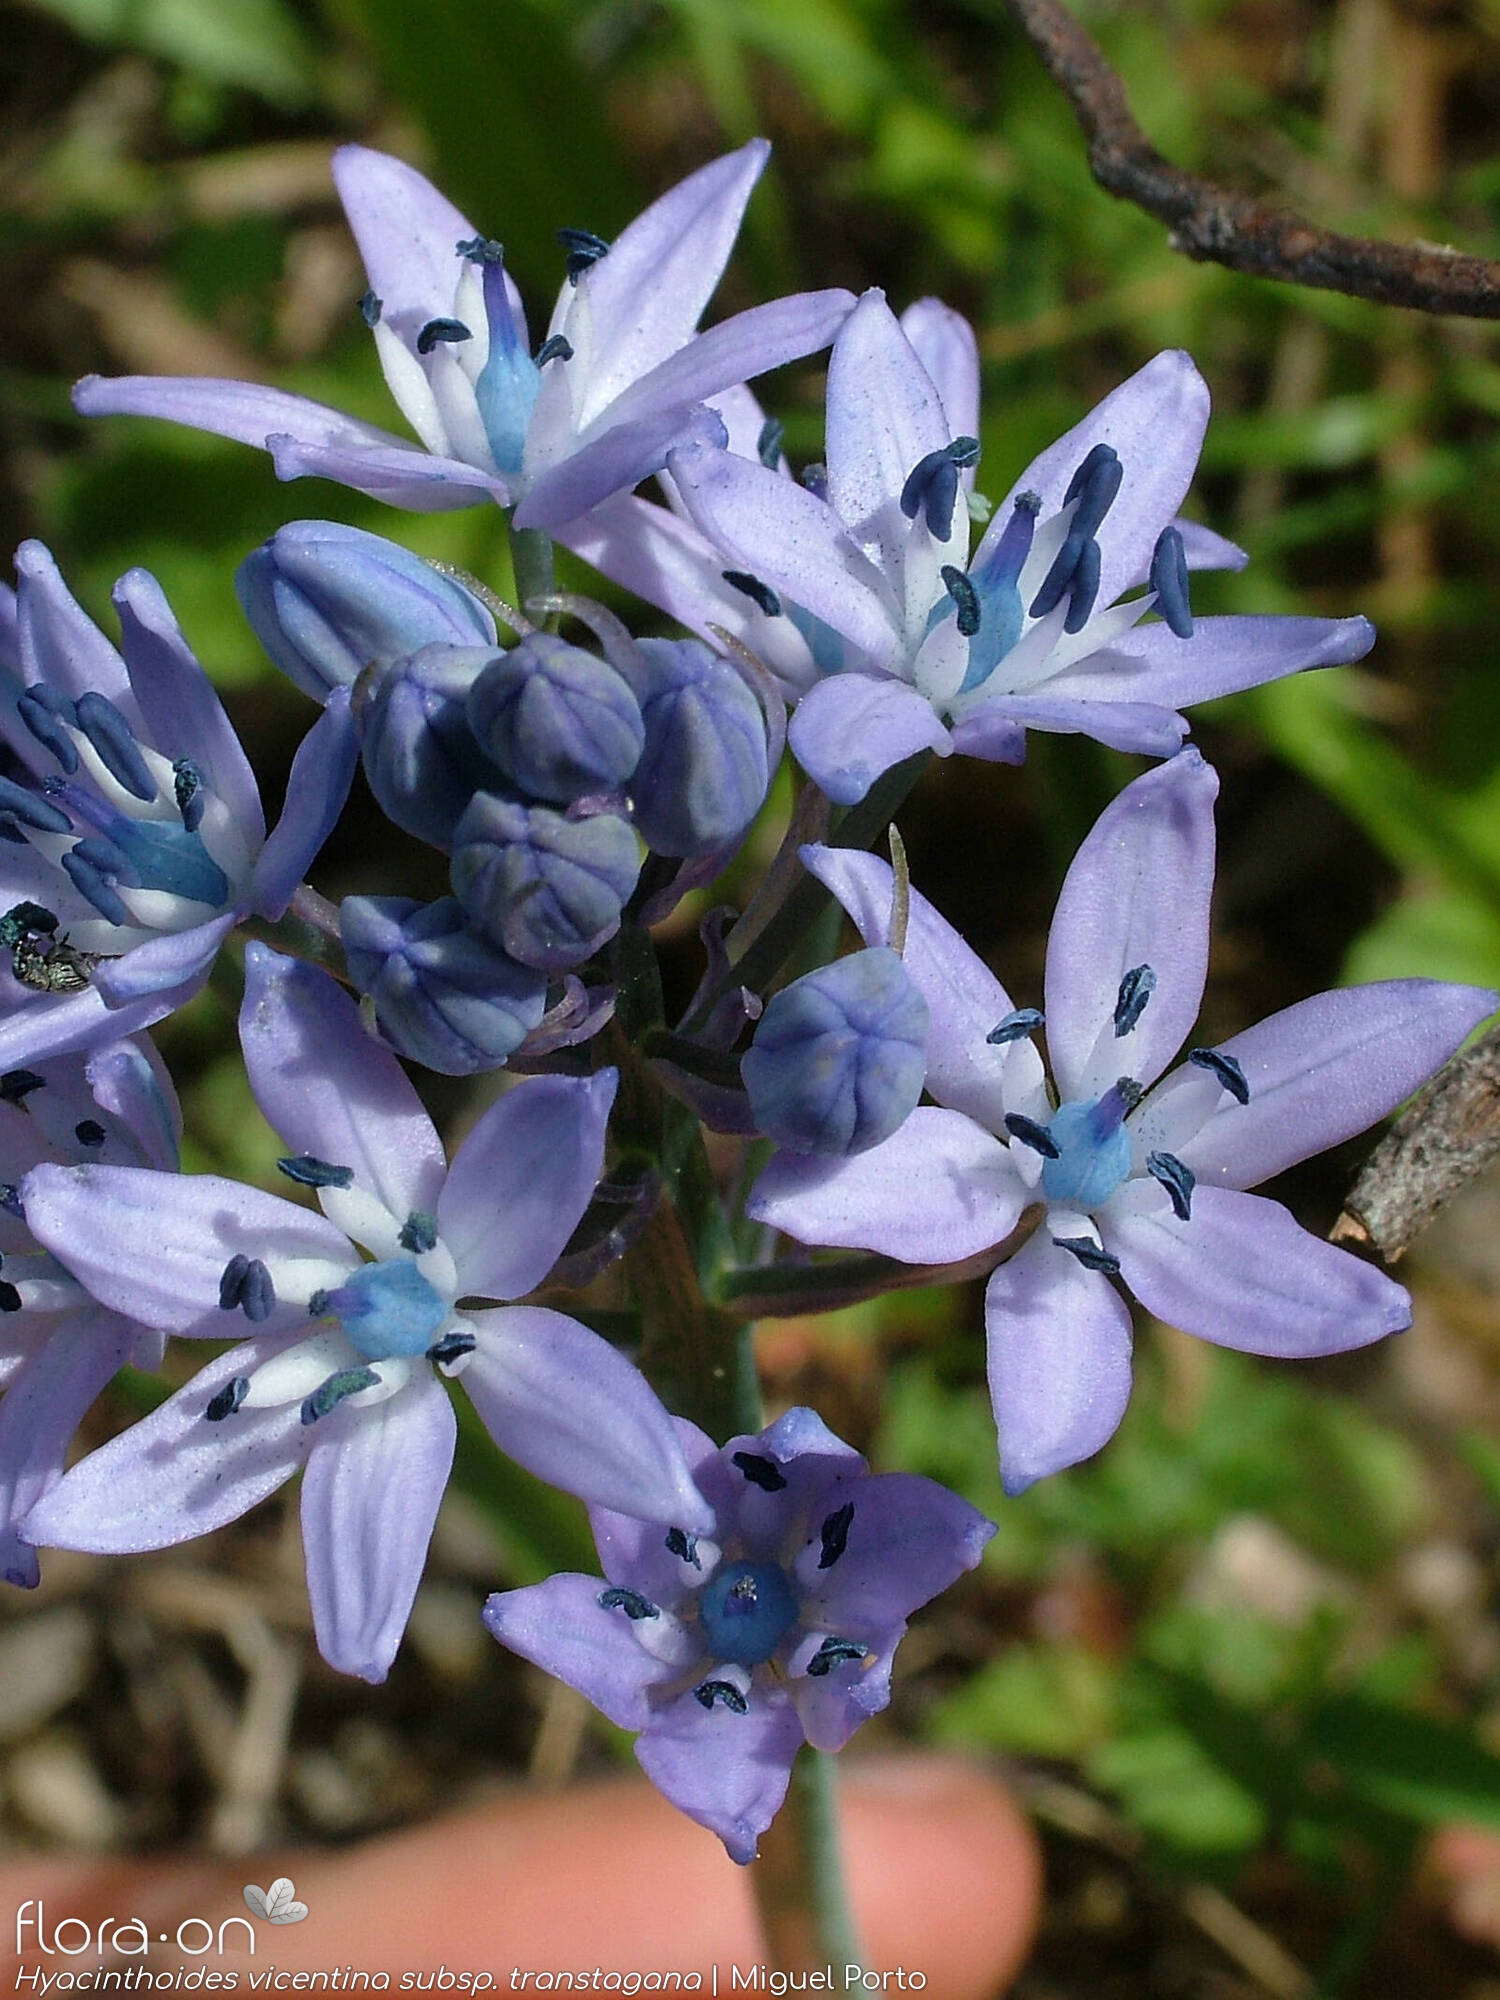 Hyacinthoides vicentina - Flor (geral) | Miguel Porto; CC BY-NC 4.0